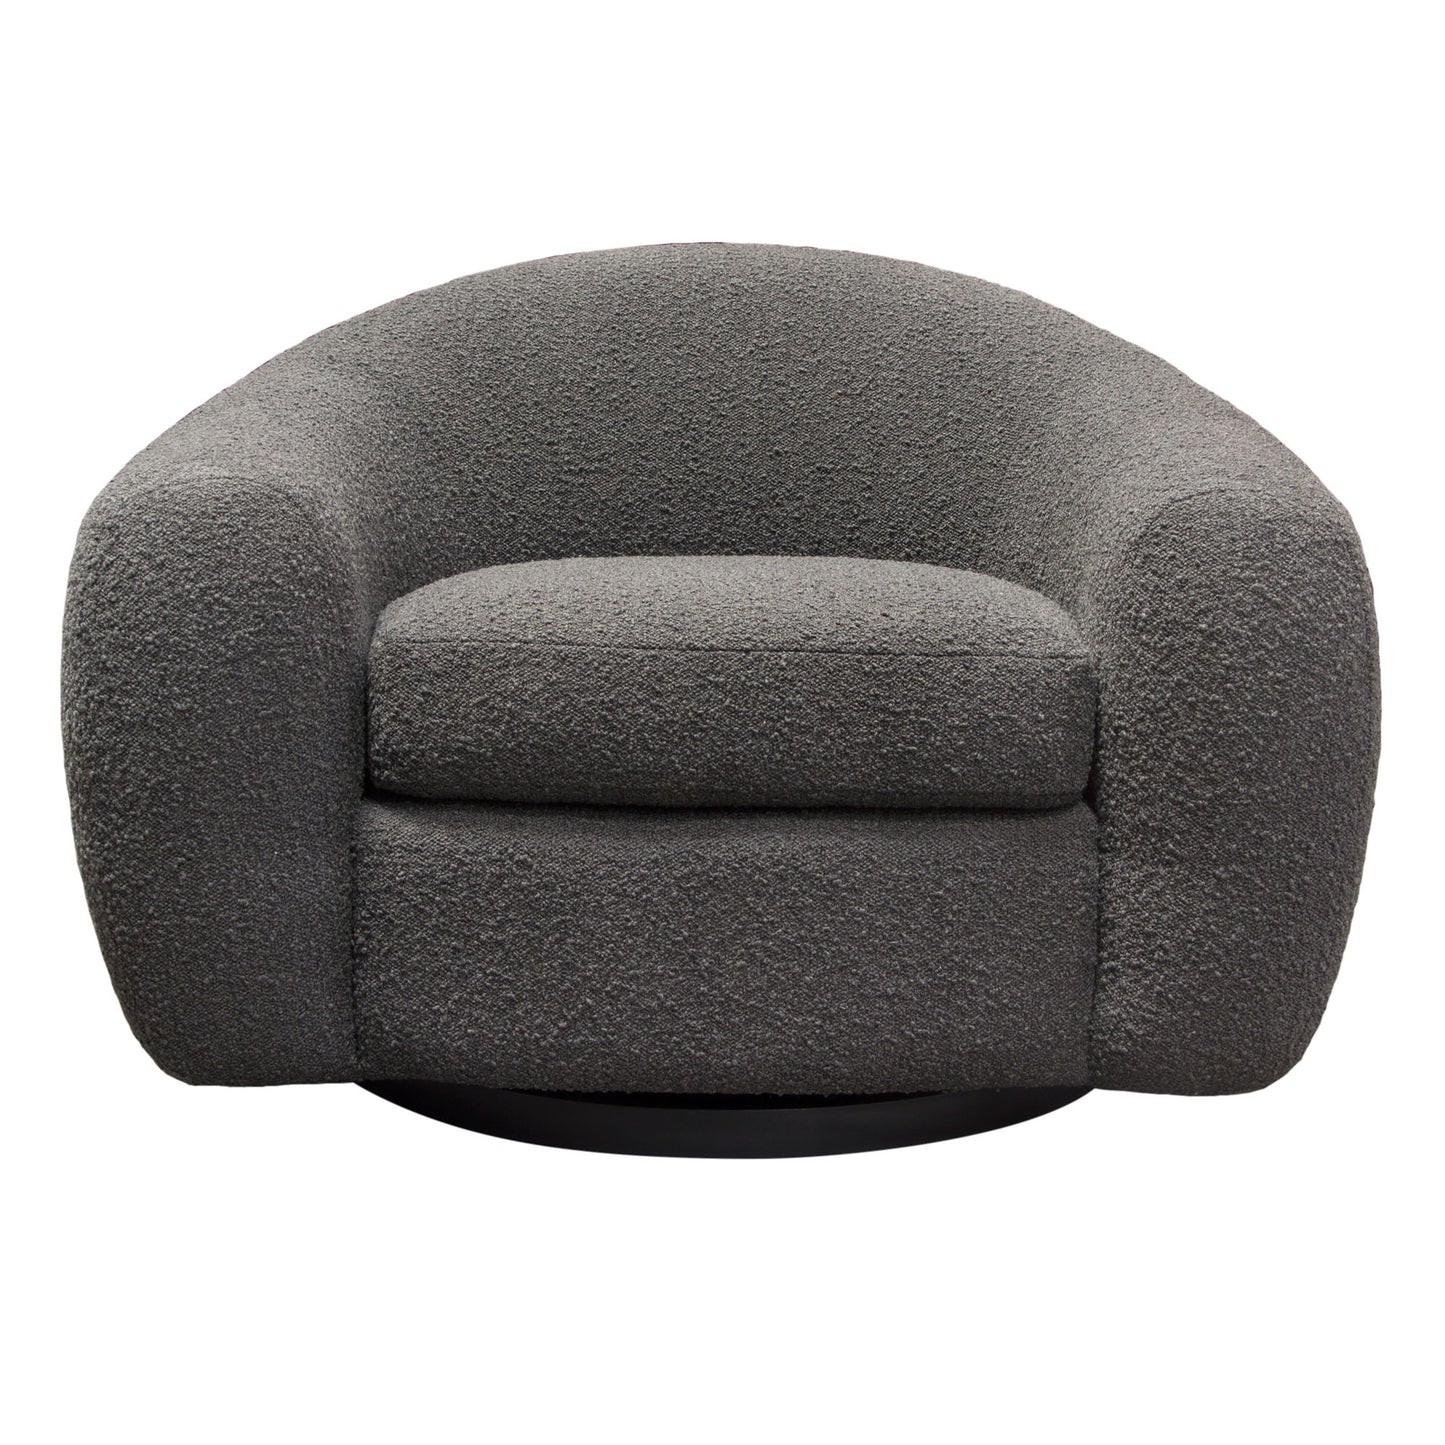 Pascal Swivel Chair in Charcoal Boucle Textured Fabric w/ Contoured Arms & Back